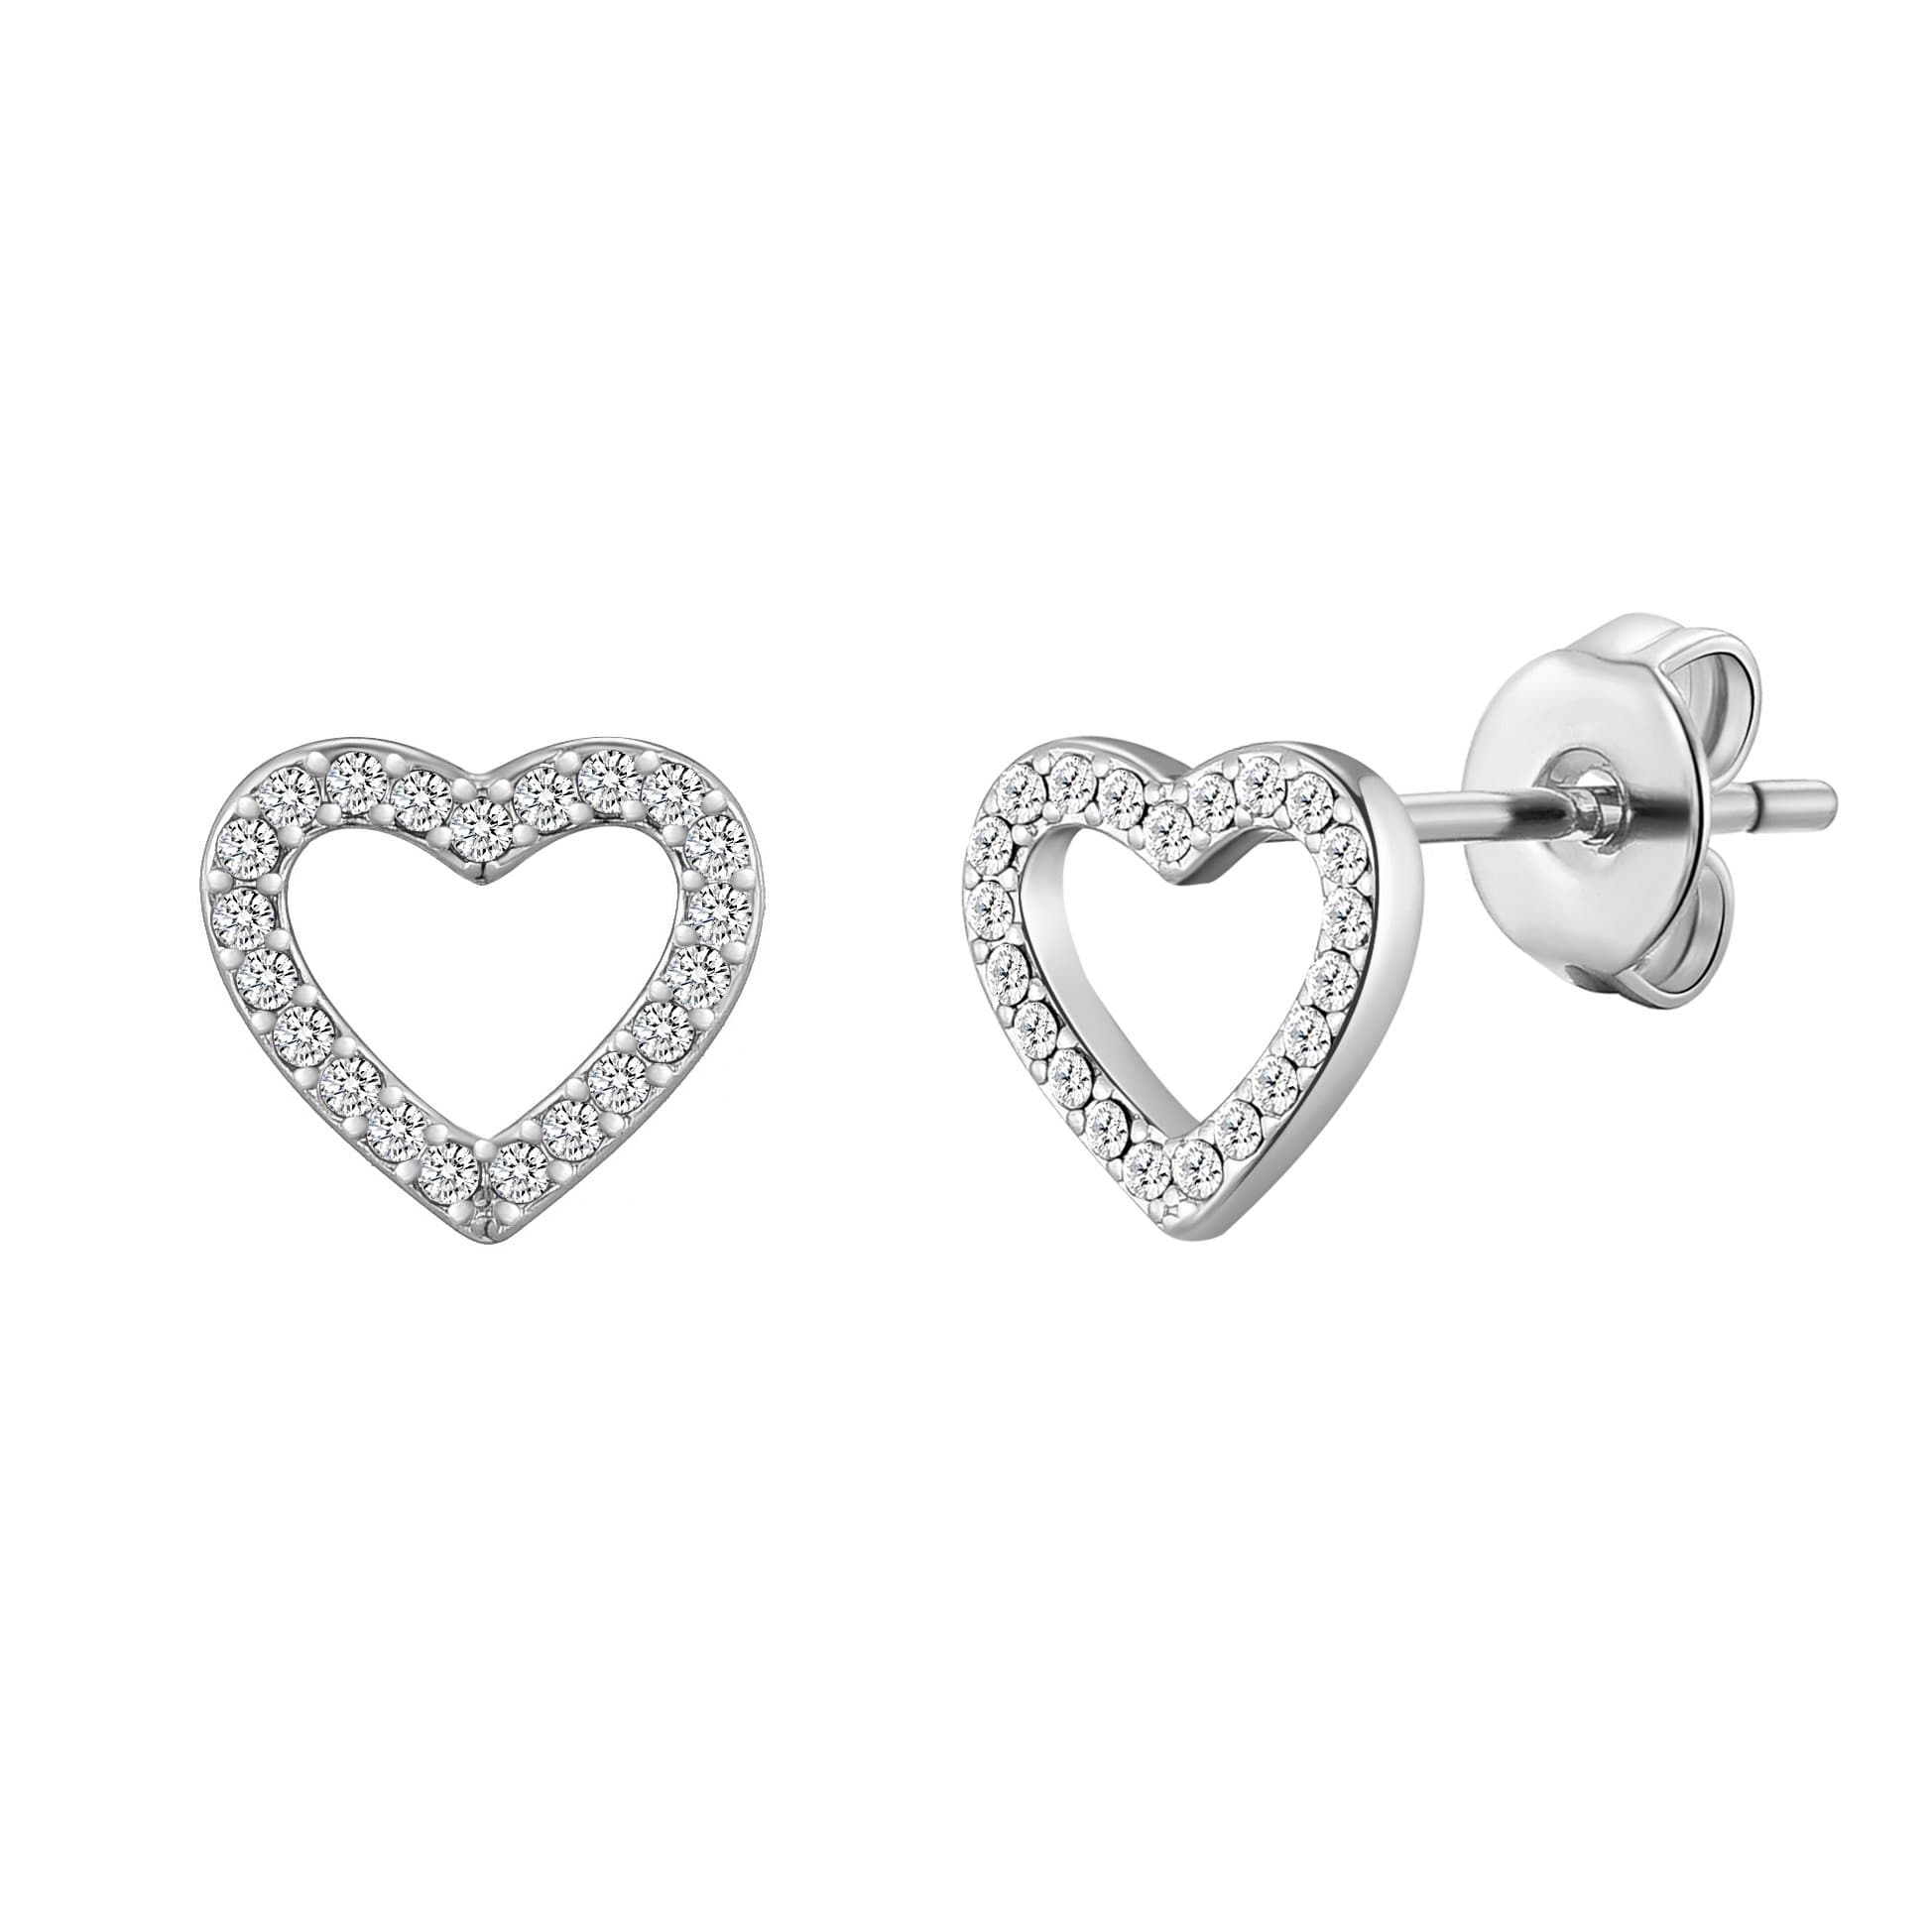 Silver Plated Open Heart Earrings Created with Zircondia® Crystals by Philip Jones Jewellery